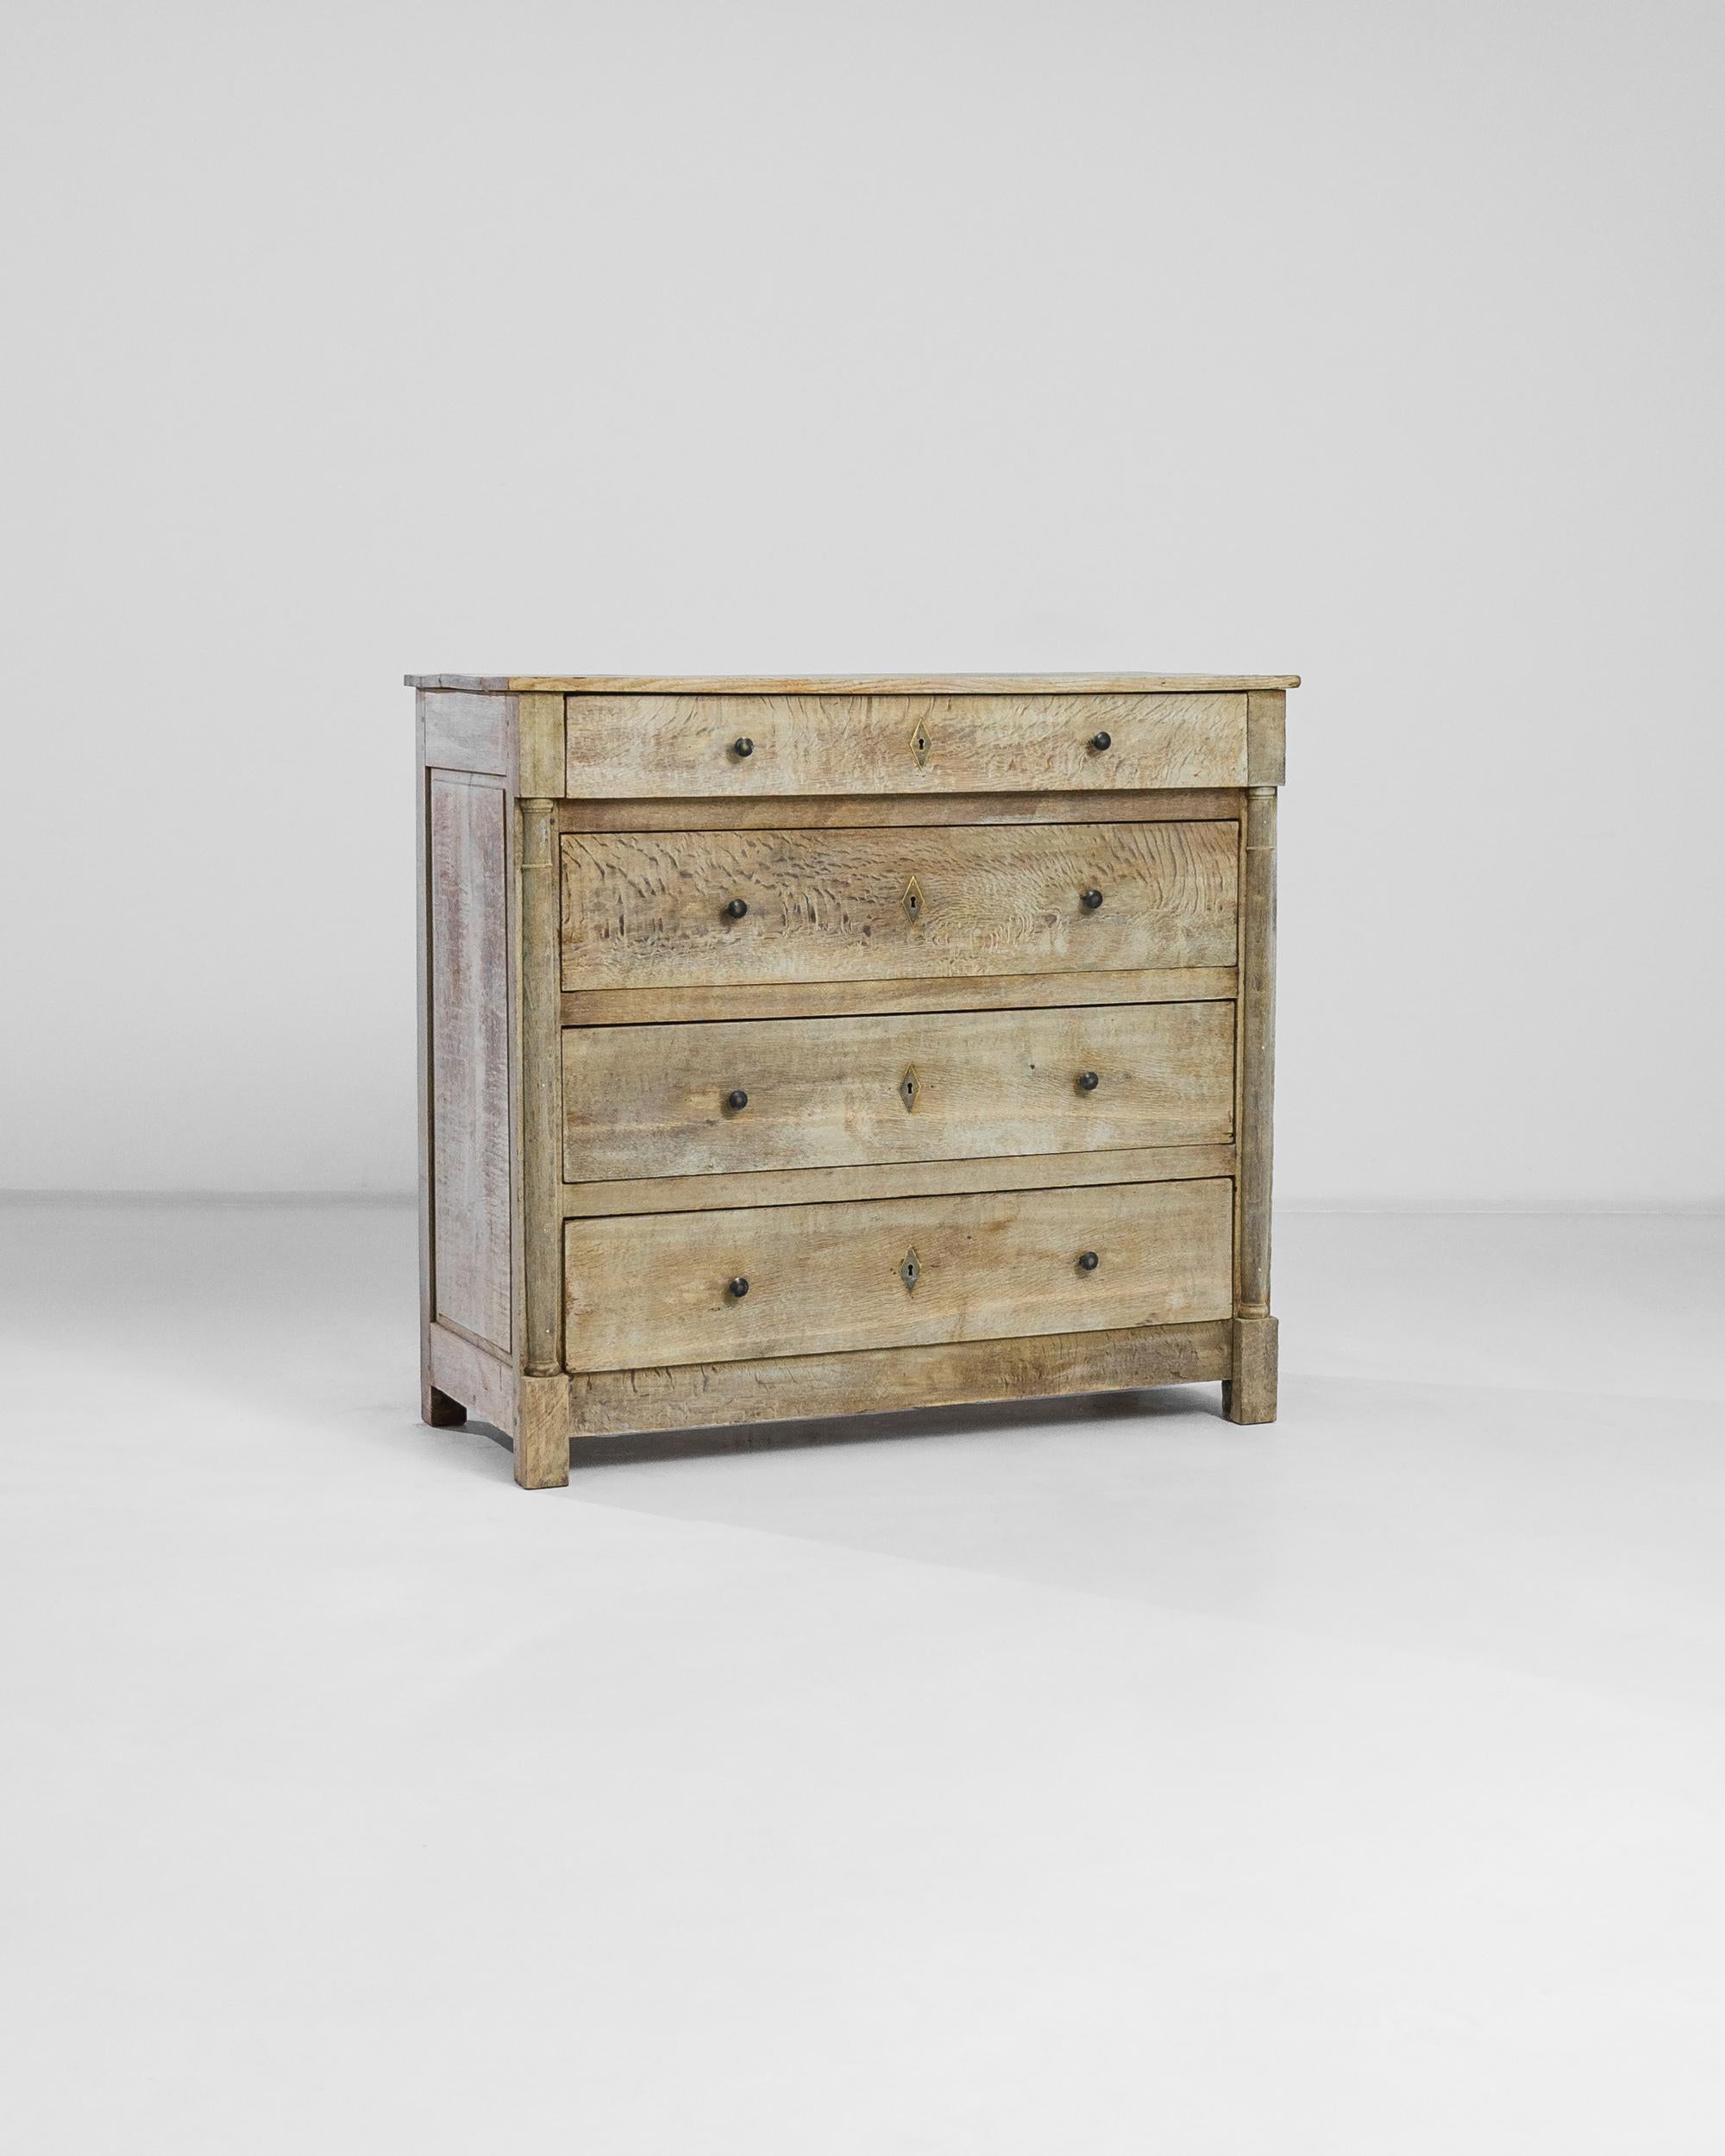 With a set of four composed drawers, this 1860s French bleached chest displays a pensive refinement. Seemingly perfectly preserved by time, its oak grain echoes like tiger stripes across its smooth surfaces. Fit with restrained brass finishings and